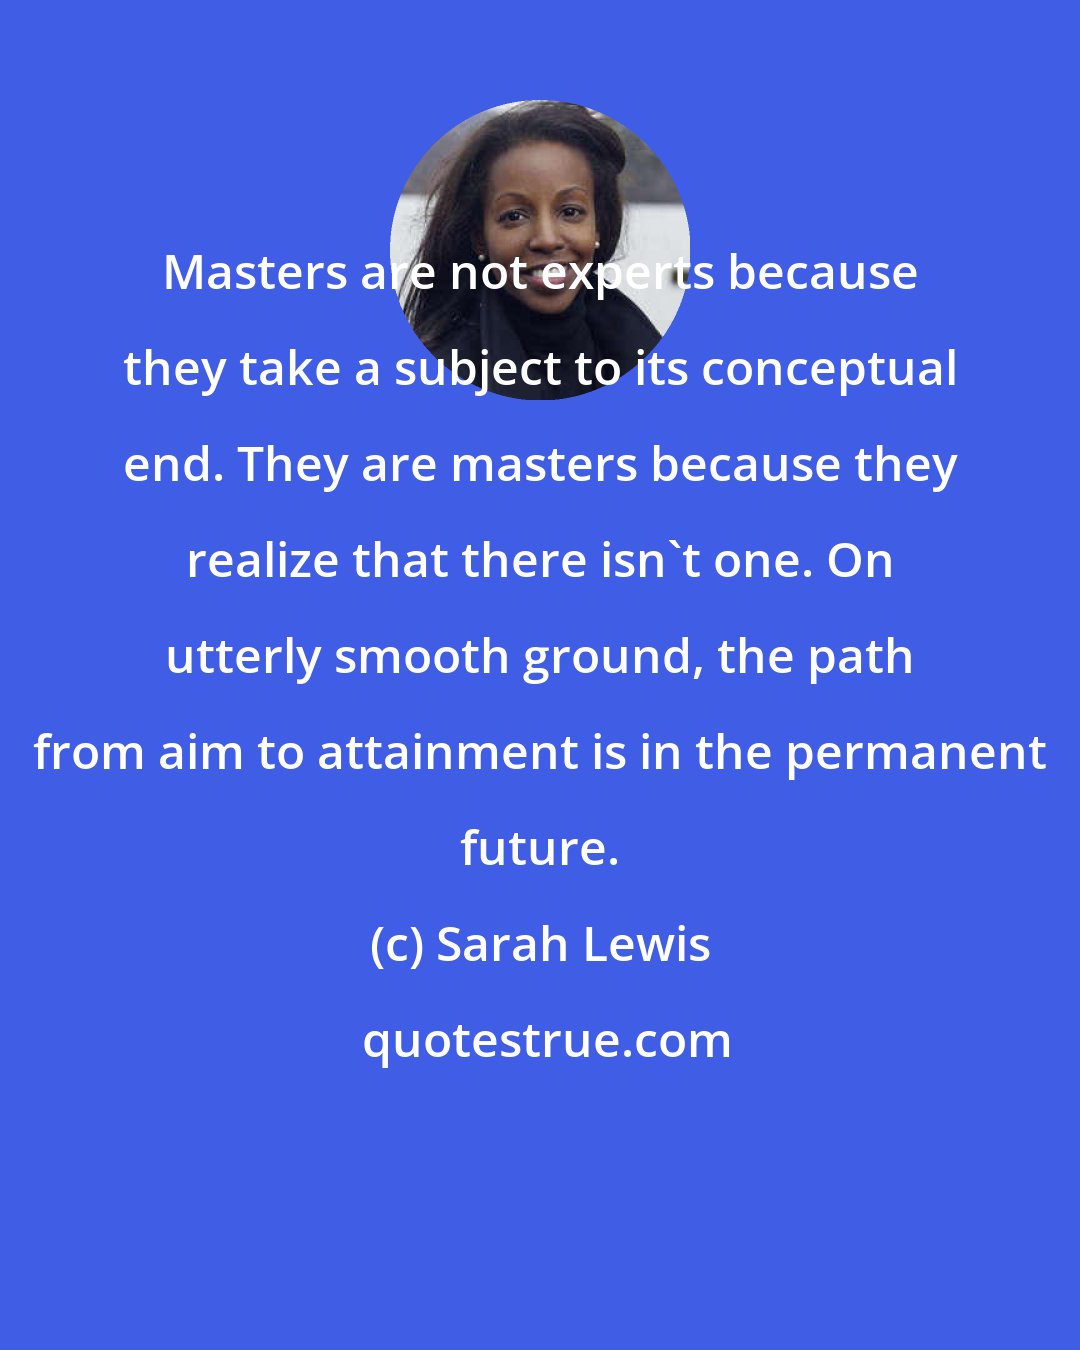 Sarah Lewis: Masters are not experts because they take a subject to its conceptual end. They are masters because they realize that there isn't one. On utterly smooth ground, the path from aim to attainment is in the permanent future.